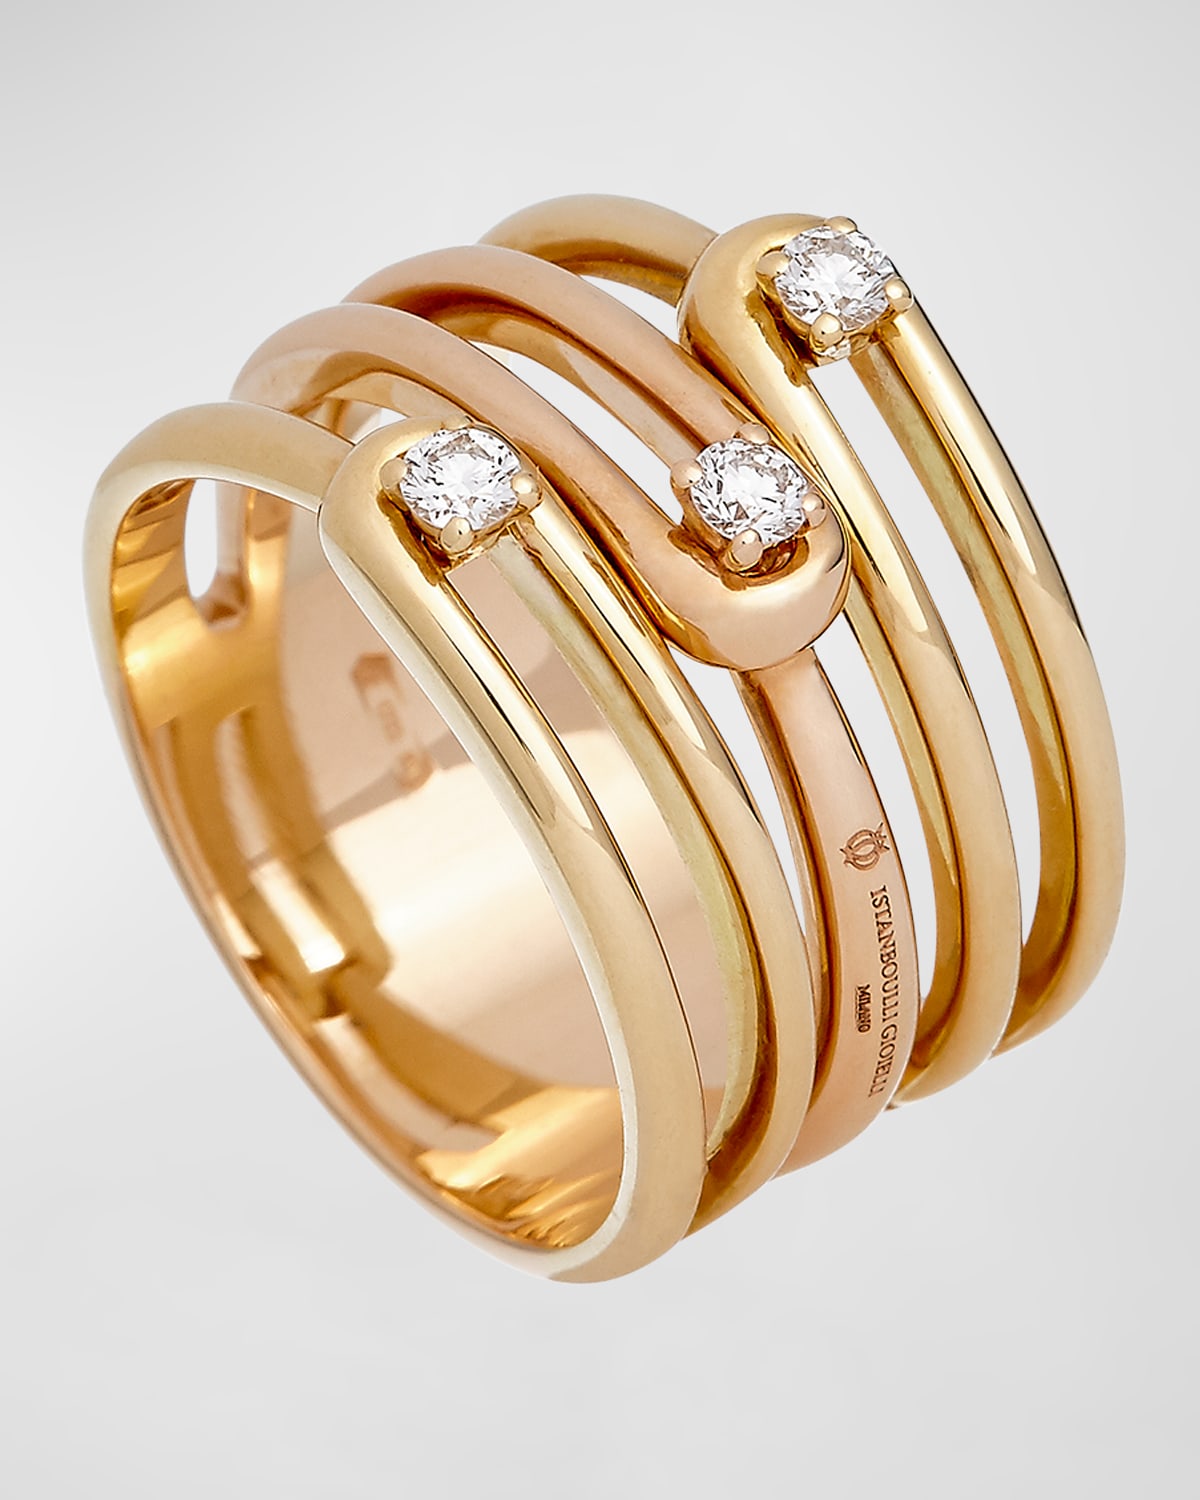 18K Yellow Gold Ring with 3 Diamonds, Size 7